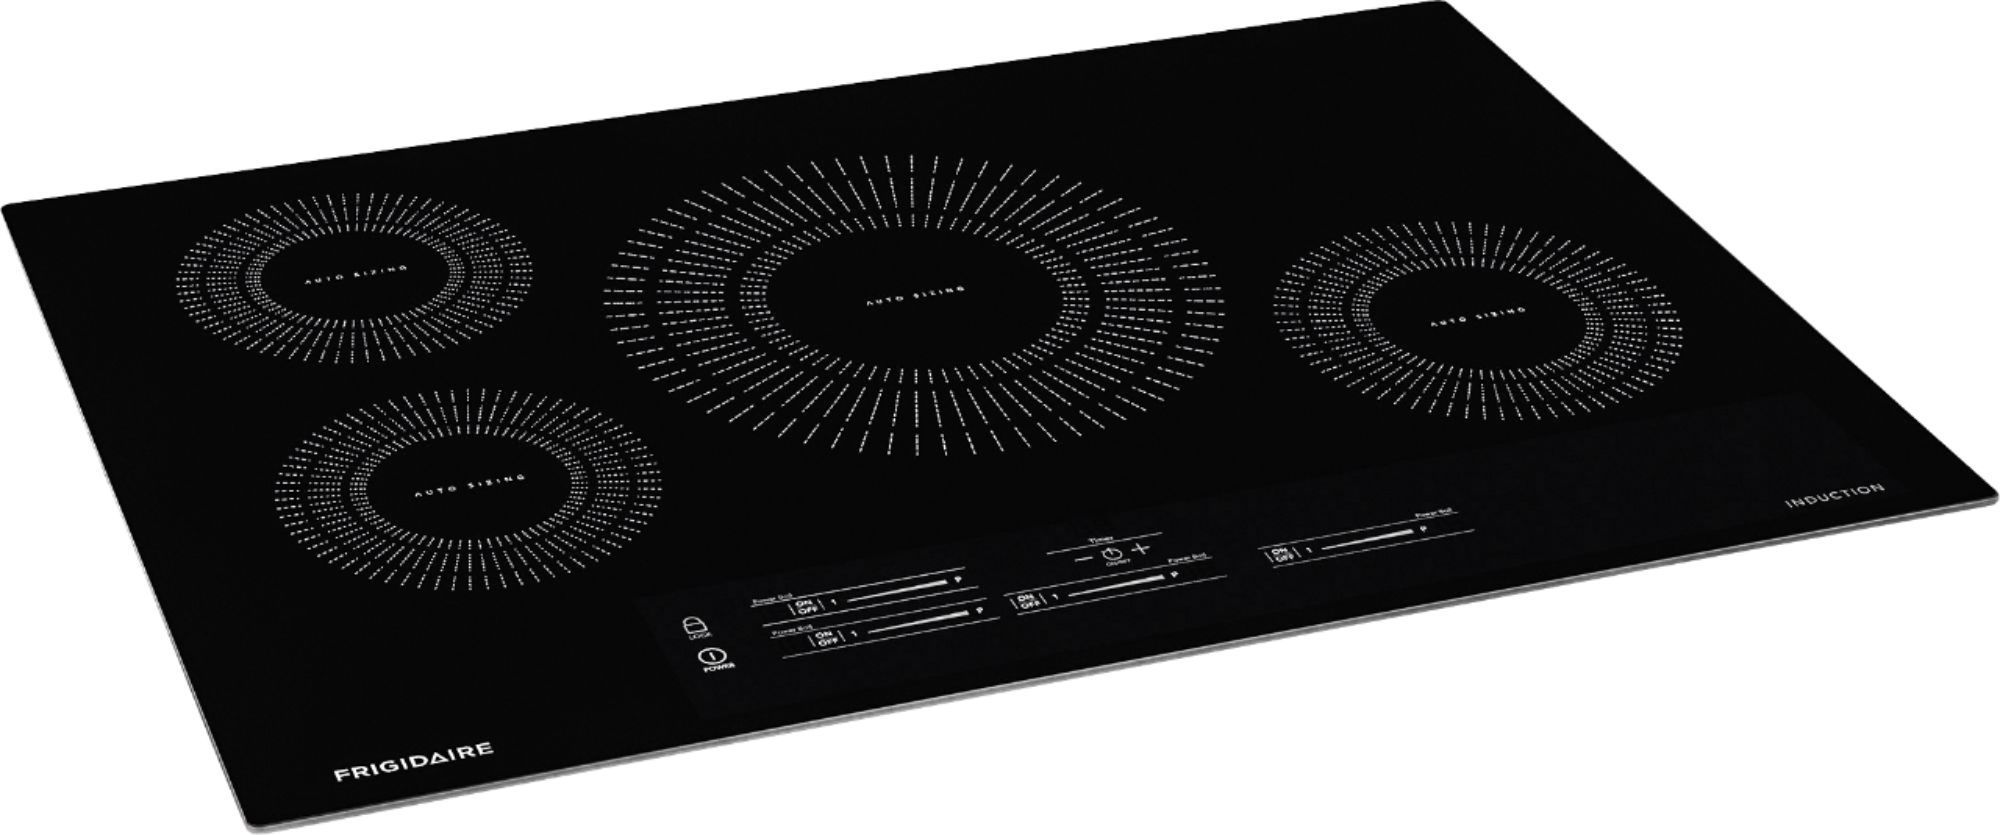 Angle View: Frigidaire - 36" Electric Induction Cooktop - Black